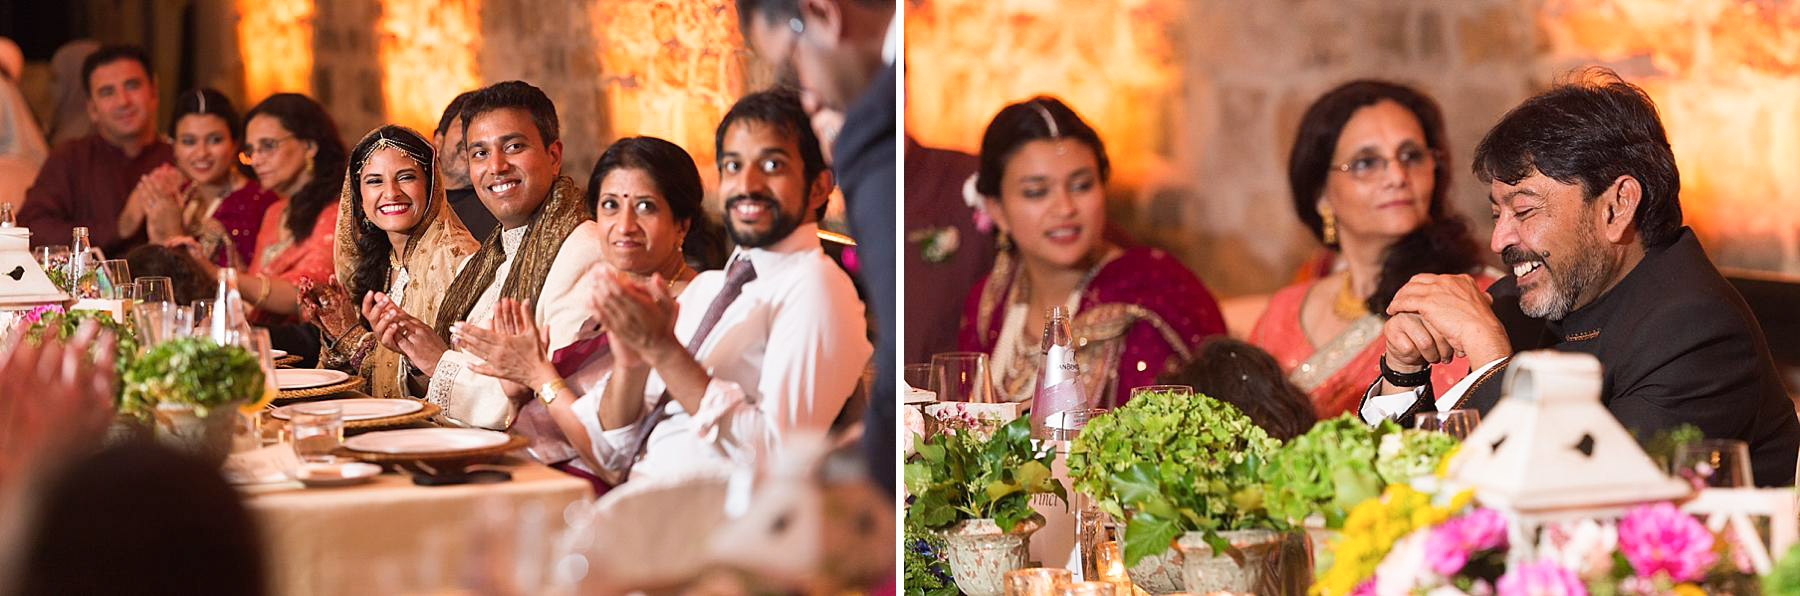 Tuscany Indian Wedding in Tuscany at Castello di Vincigliata and Villa Montefiano. Planning by WeddingsItaly BY Regency